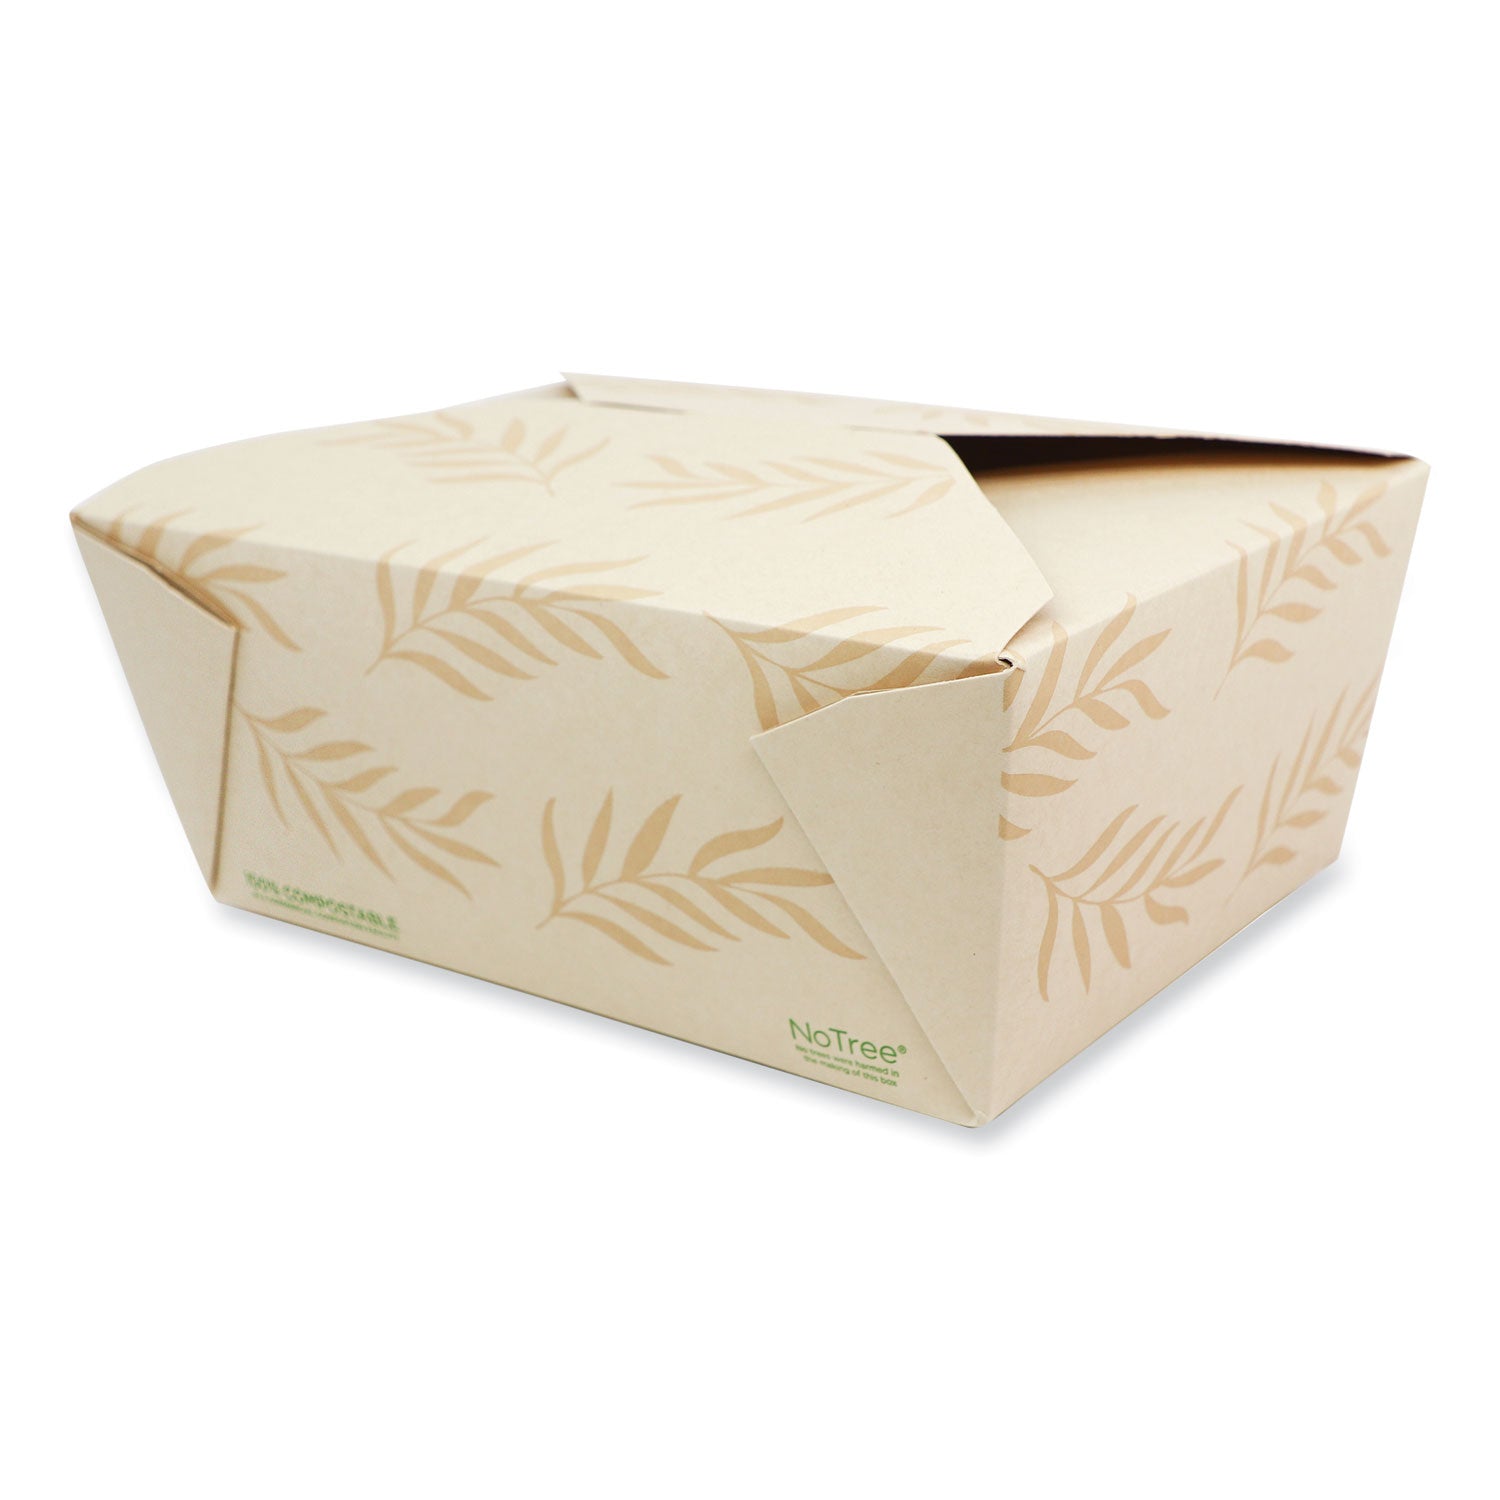 no-tree-folded-takeout-containers-95-oz-65-x-87-x-35-natural-sugarcane-160-carton_wortont4 - 1